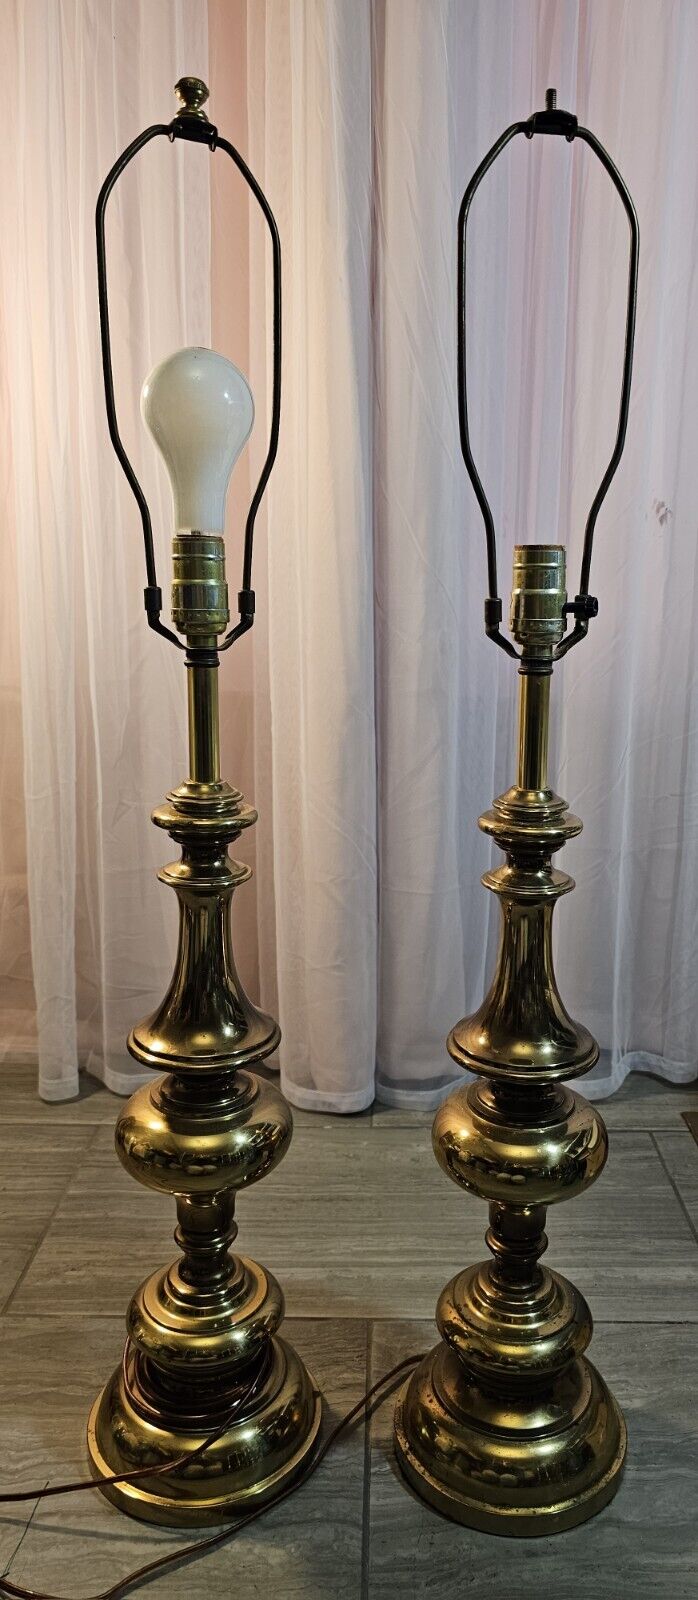 Vintage Pair of Stiffel Brass MCM Table Lamps Home Decor Lighting